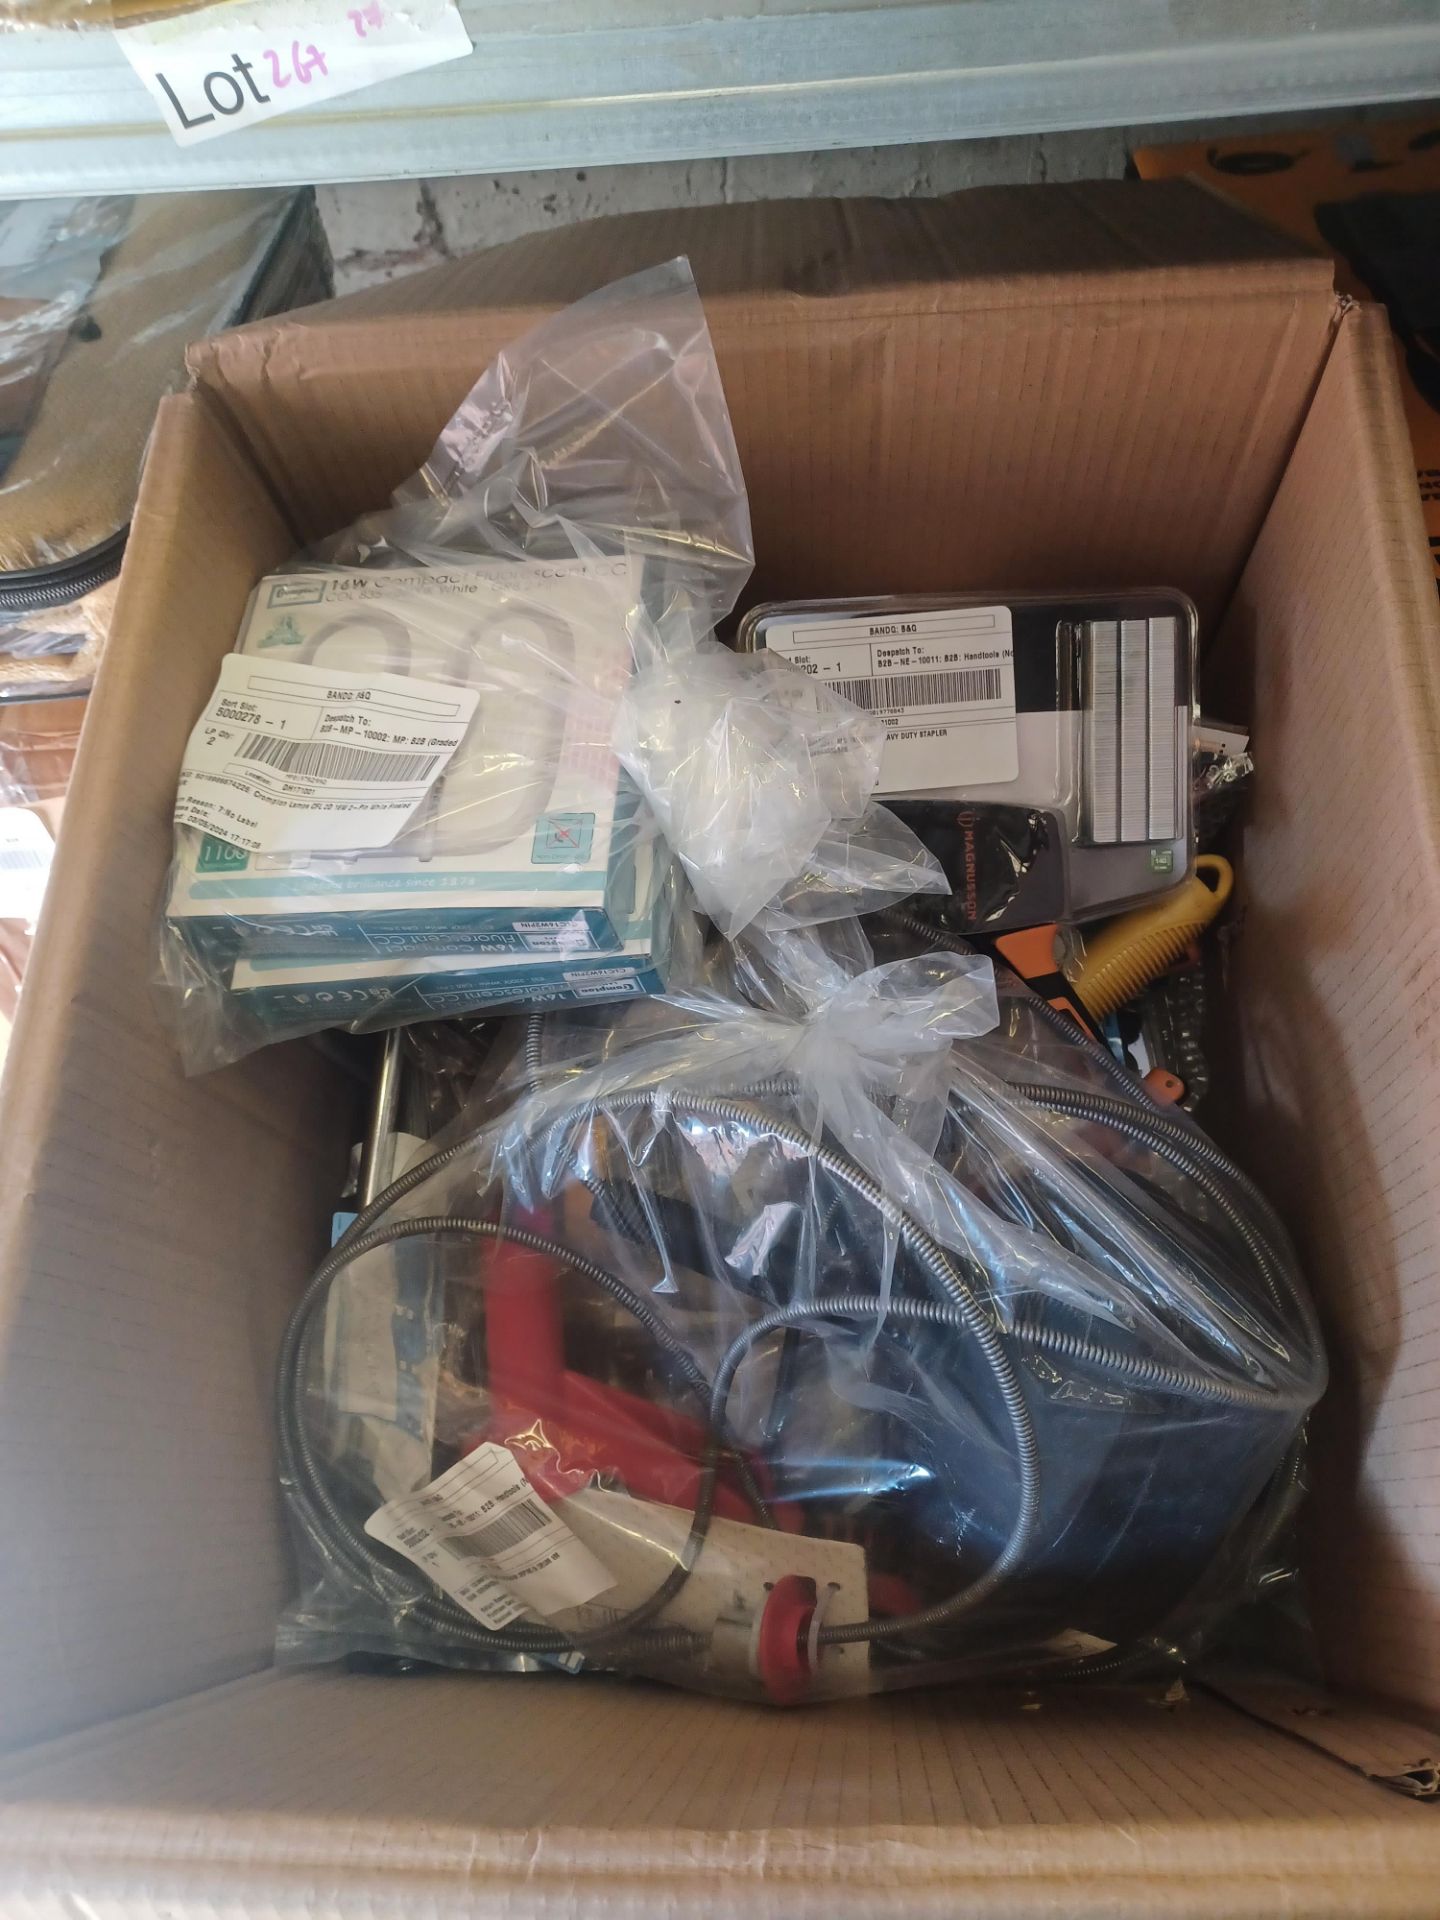 25 x Mixed Lot of Goods; to include - Lighting, Magnusson Tools, Drill Bits and more. - S2.